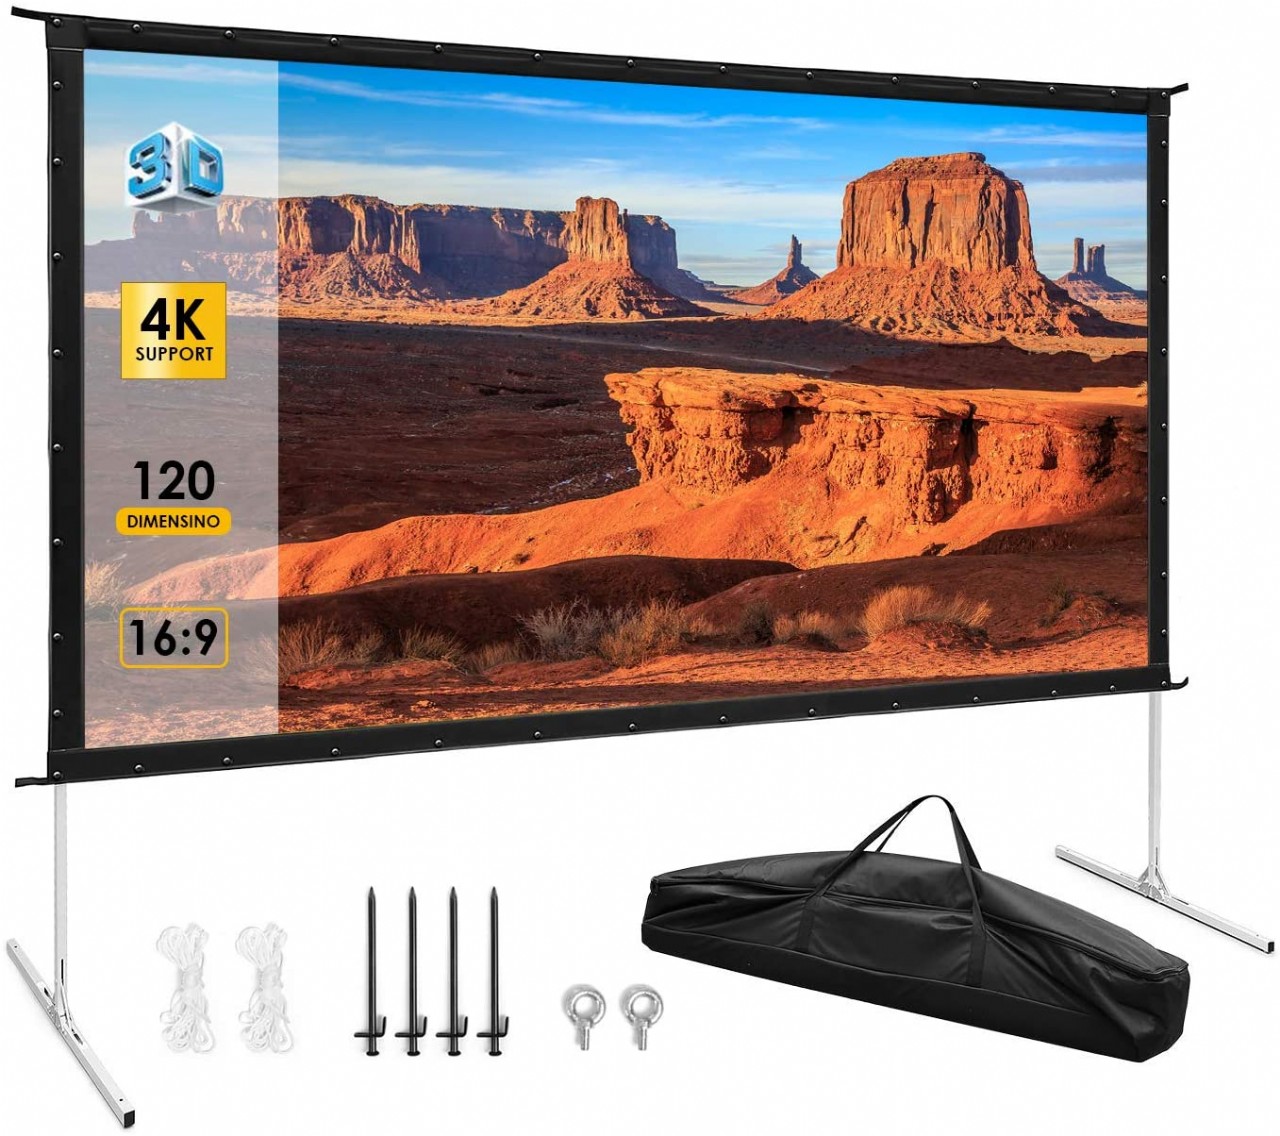 TUSY Projector Screen with Stand 120